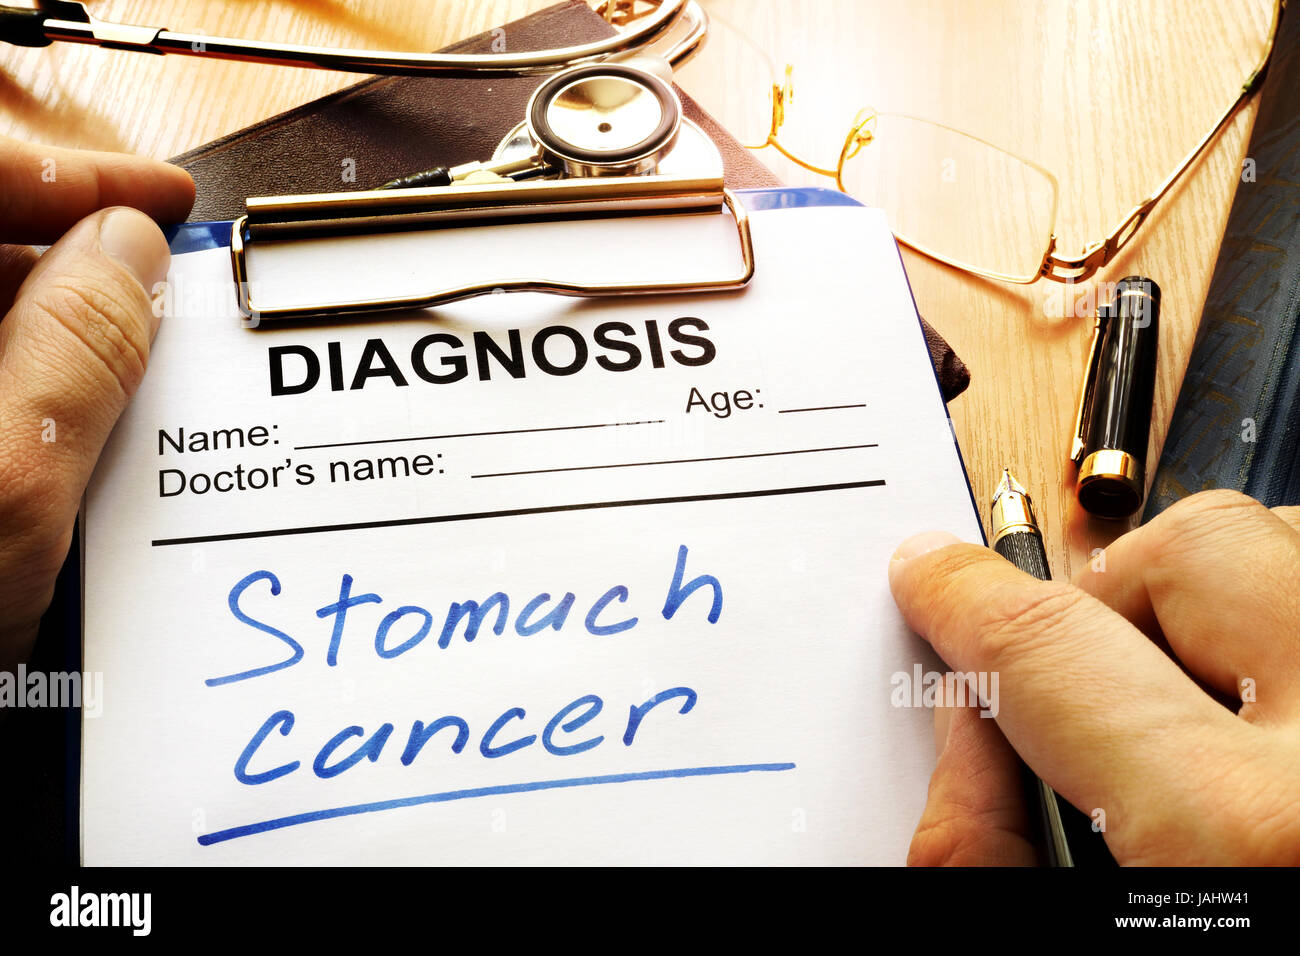 Stomach cancer diagnosis on a diagnostic form. Stock Photo